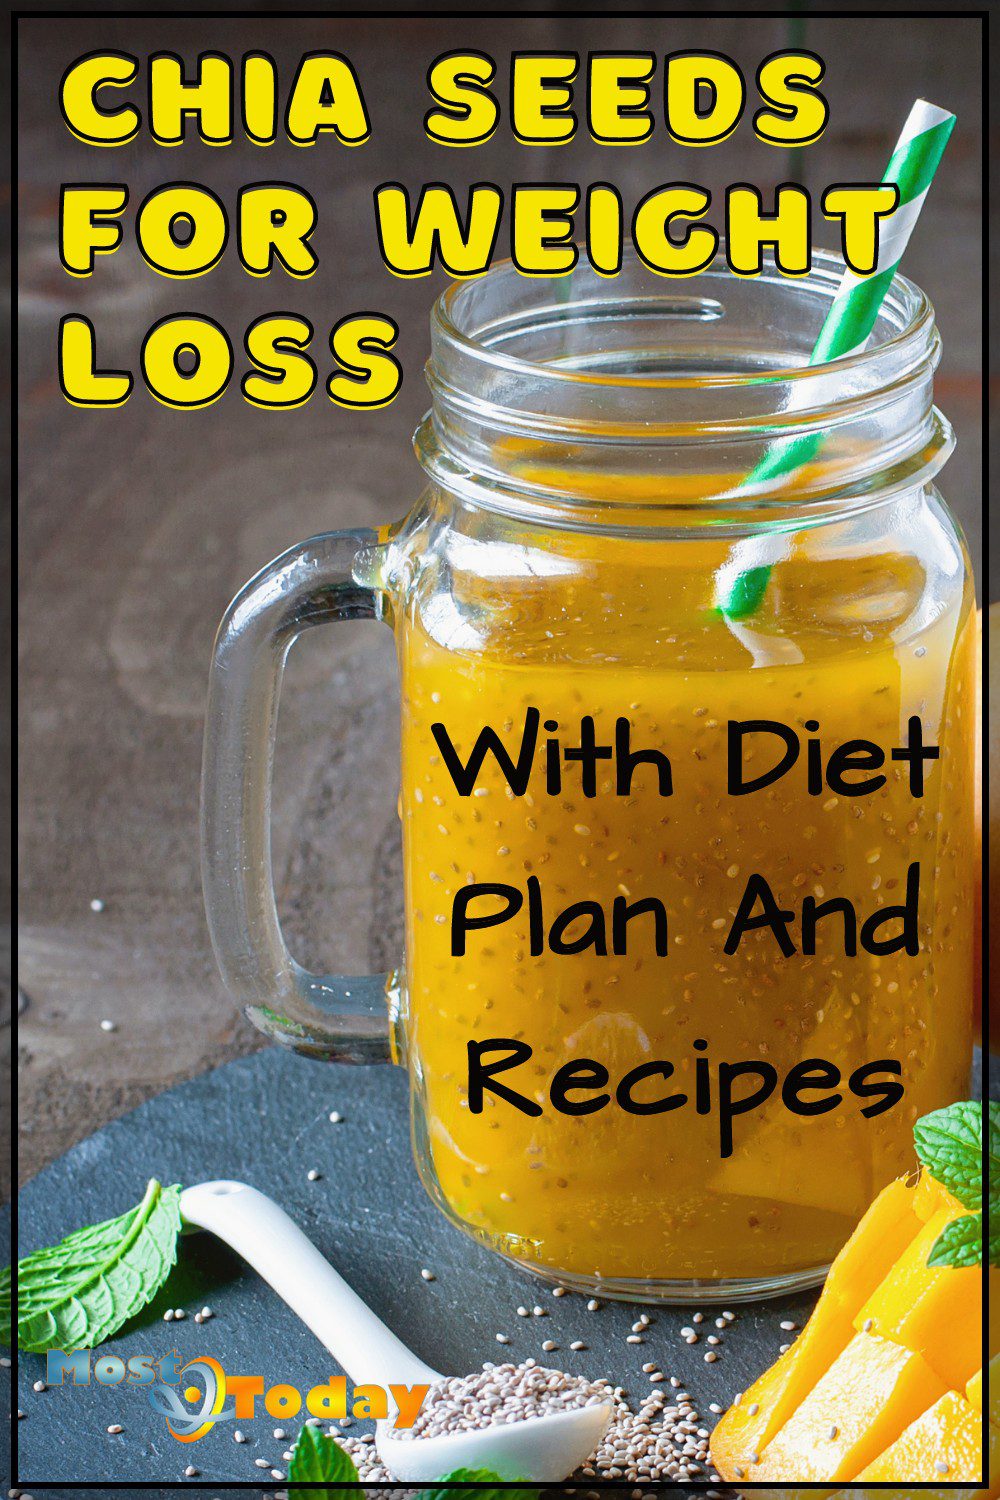 Weight Loss With Chia Seeds With Diet Plan And Recipes